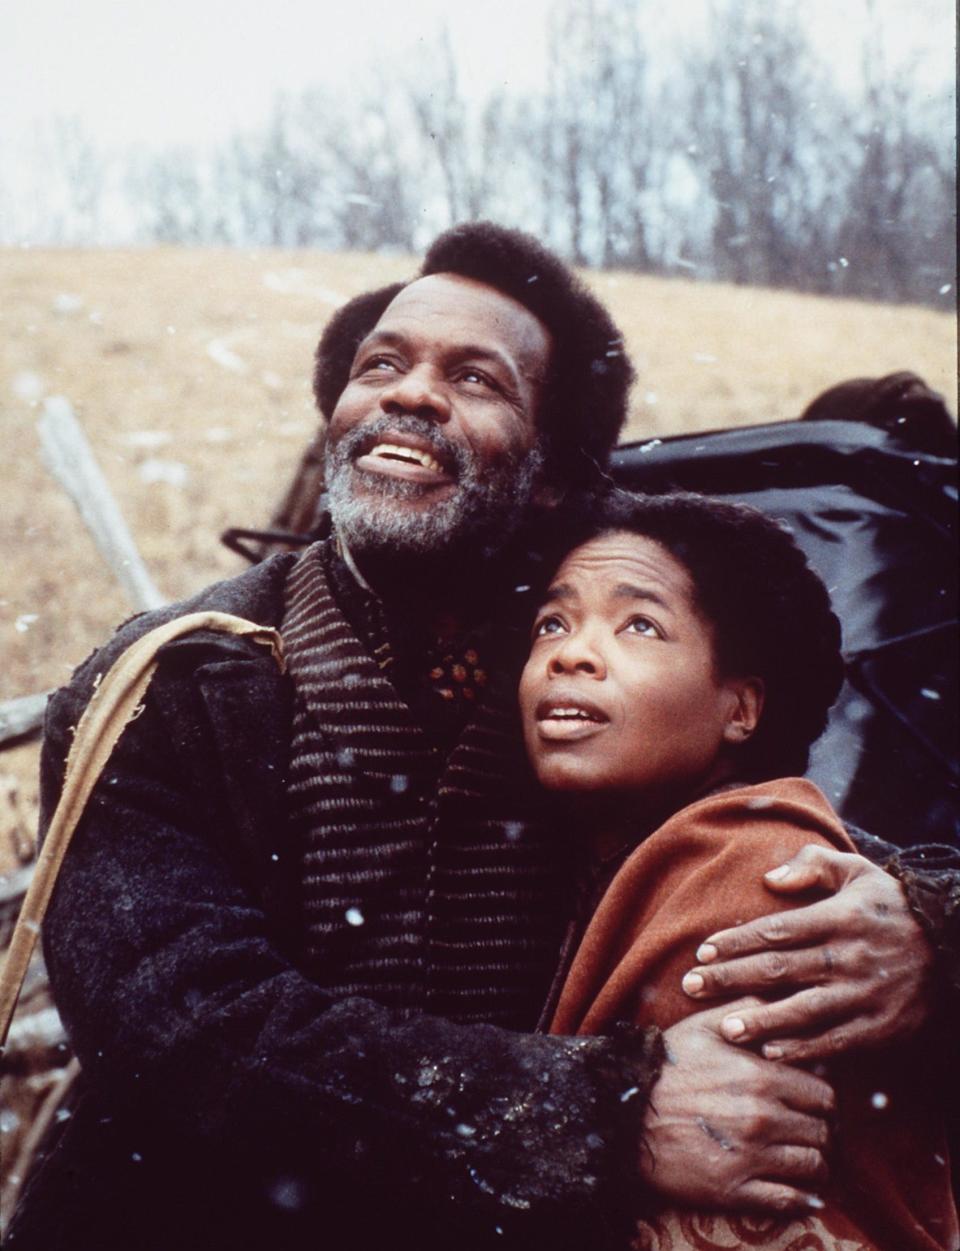 Danny Glover and Oprah Winfrey in a scene from the film "Beloved."